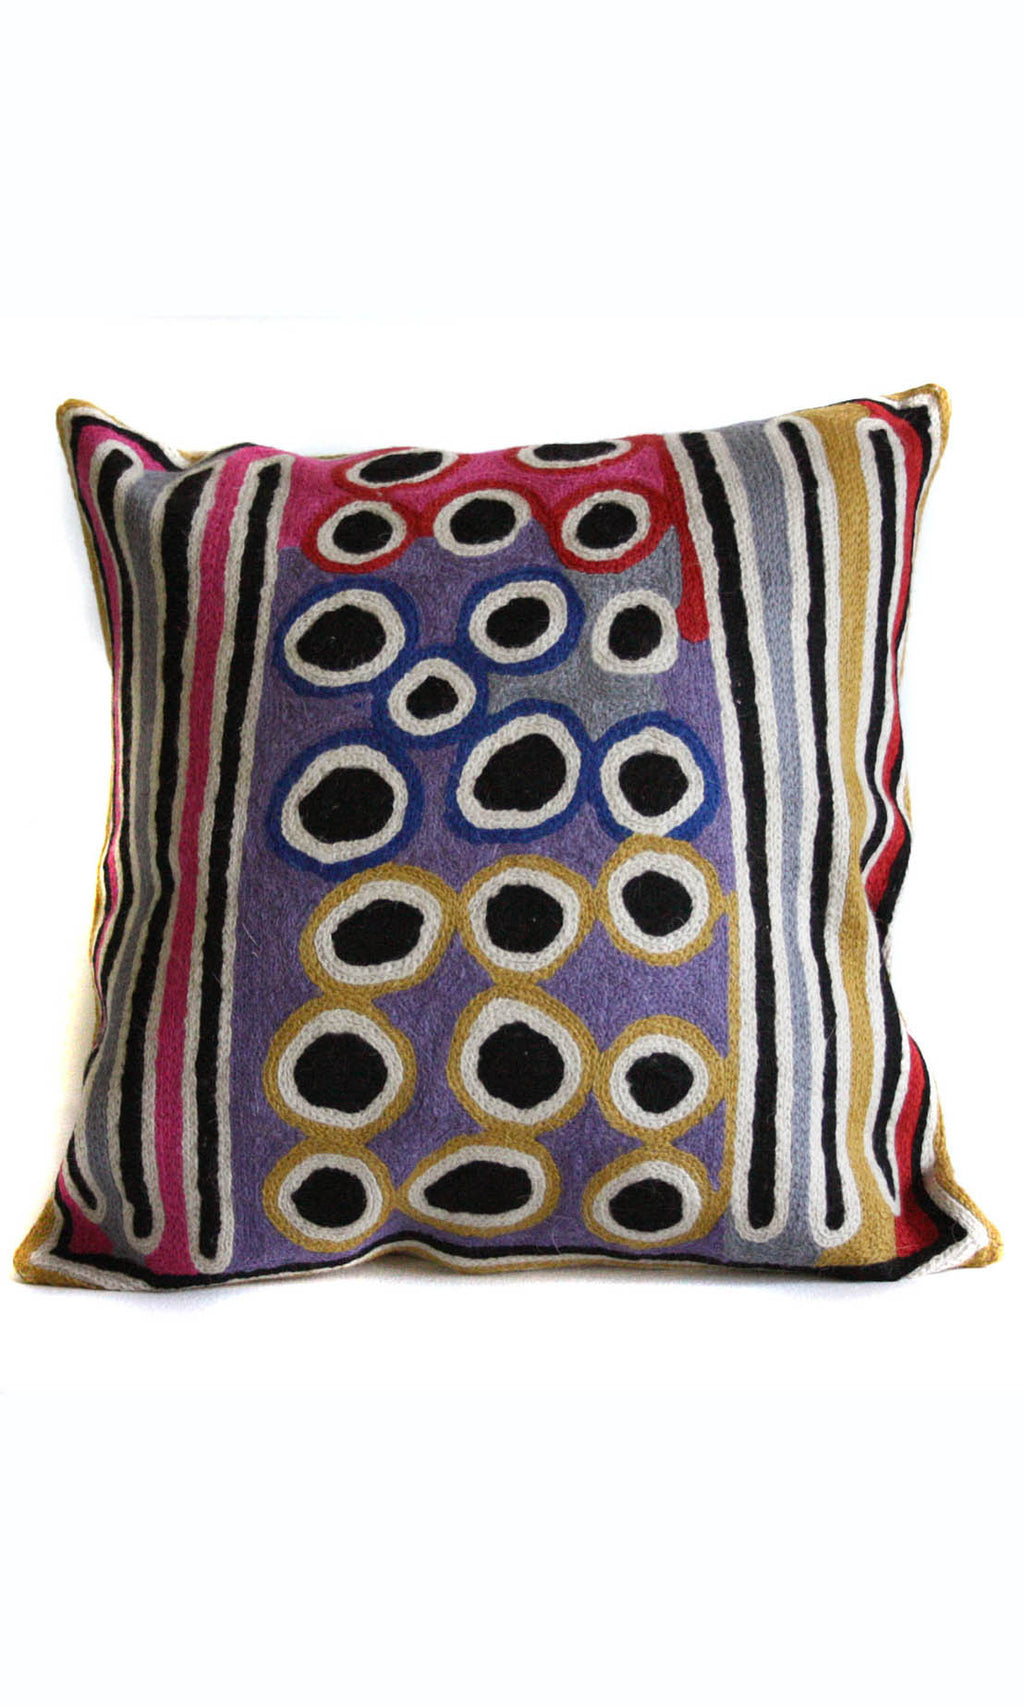 Aboriginal Art Cushion Cover by Betsy Lewis